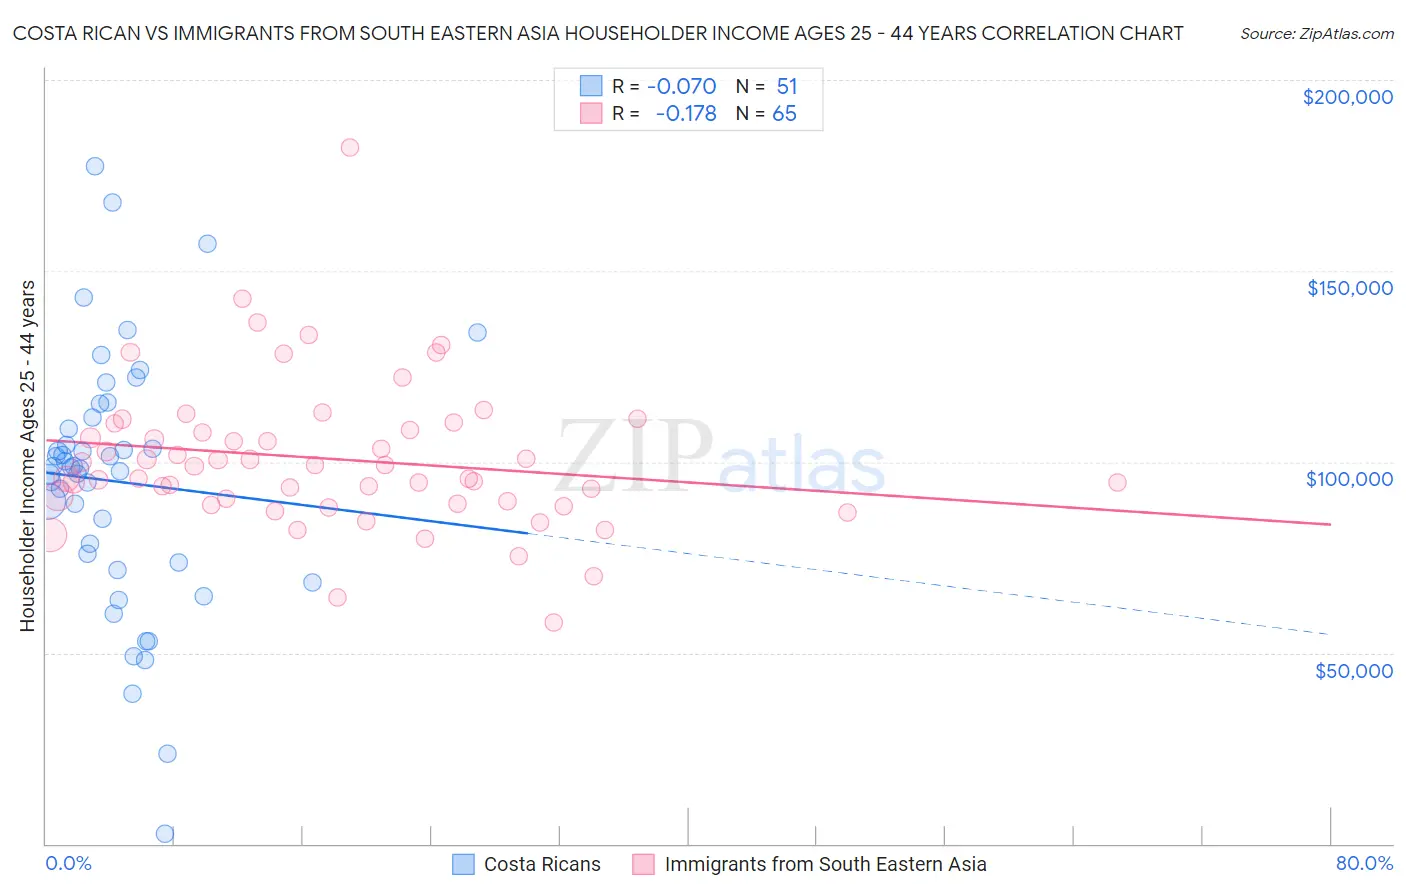 Costa Rican vs Immigrants from South Eastern Asia Householder Income Ages 25 - 44 years